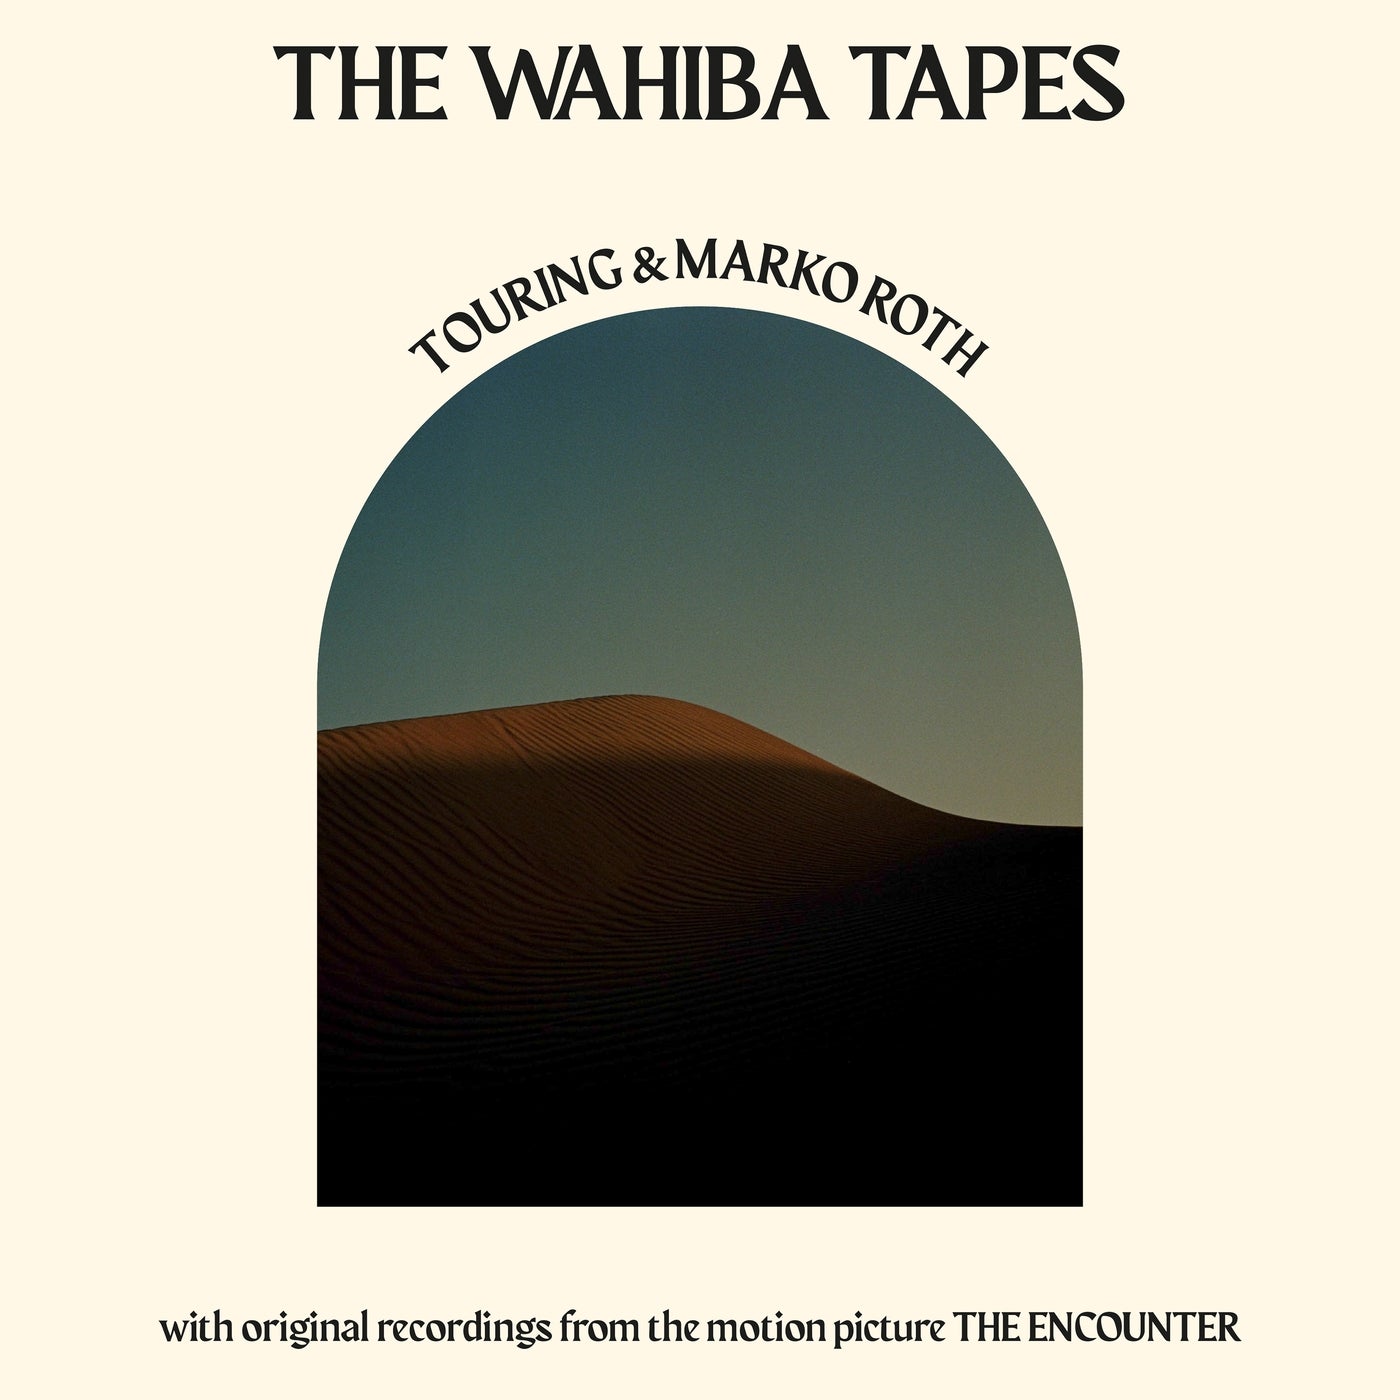 The Wahiba Tapes (From "The Encounter")